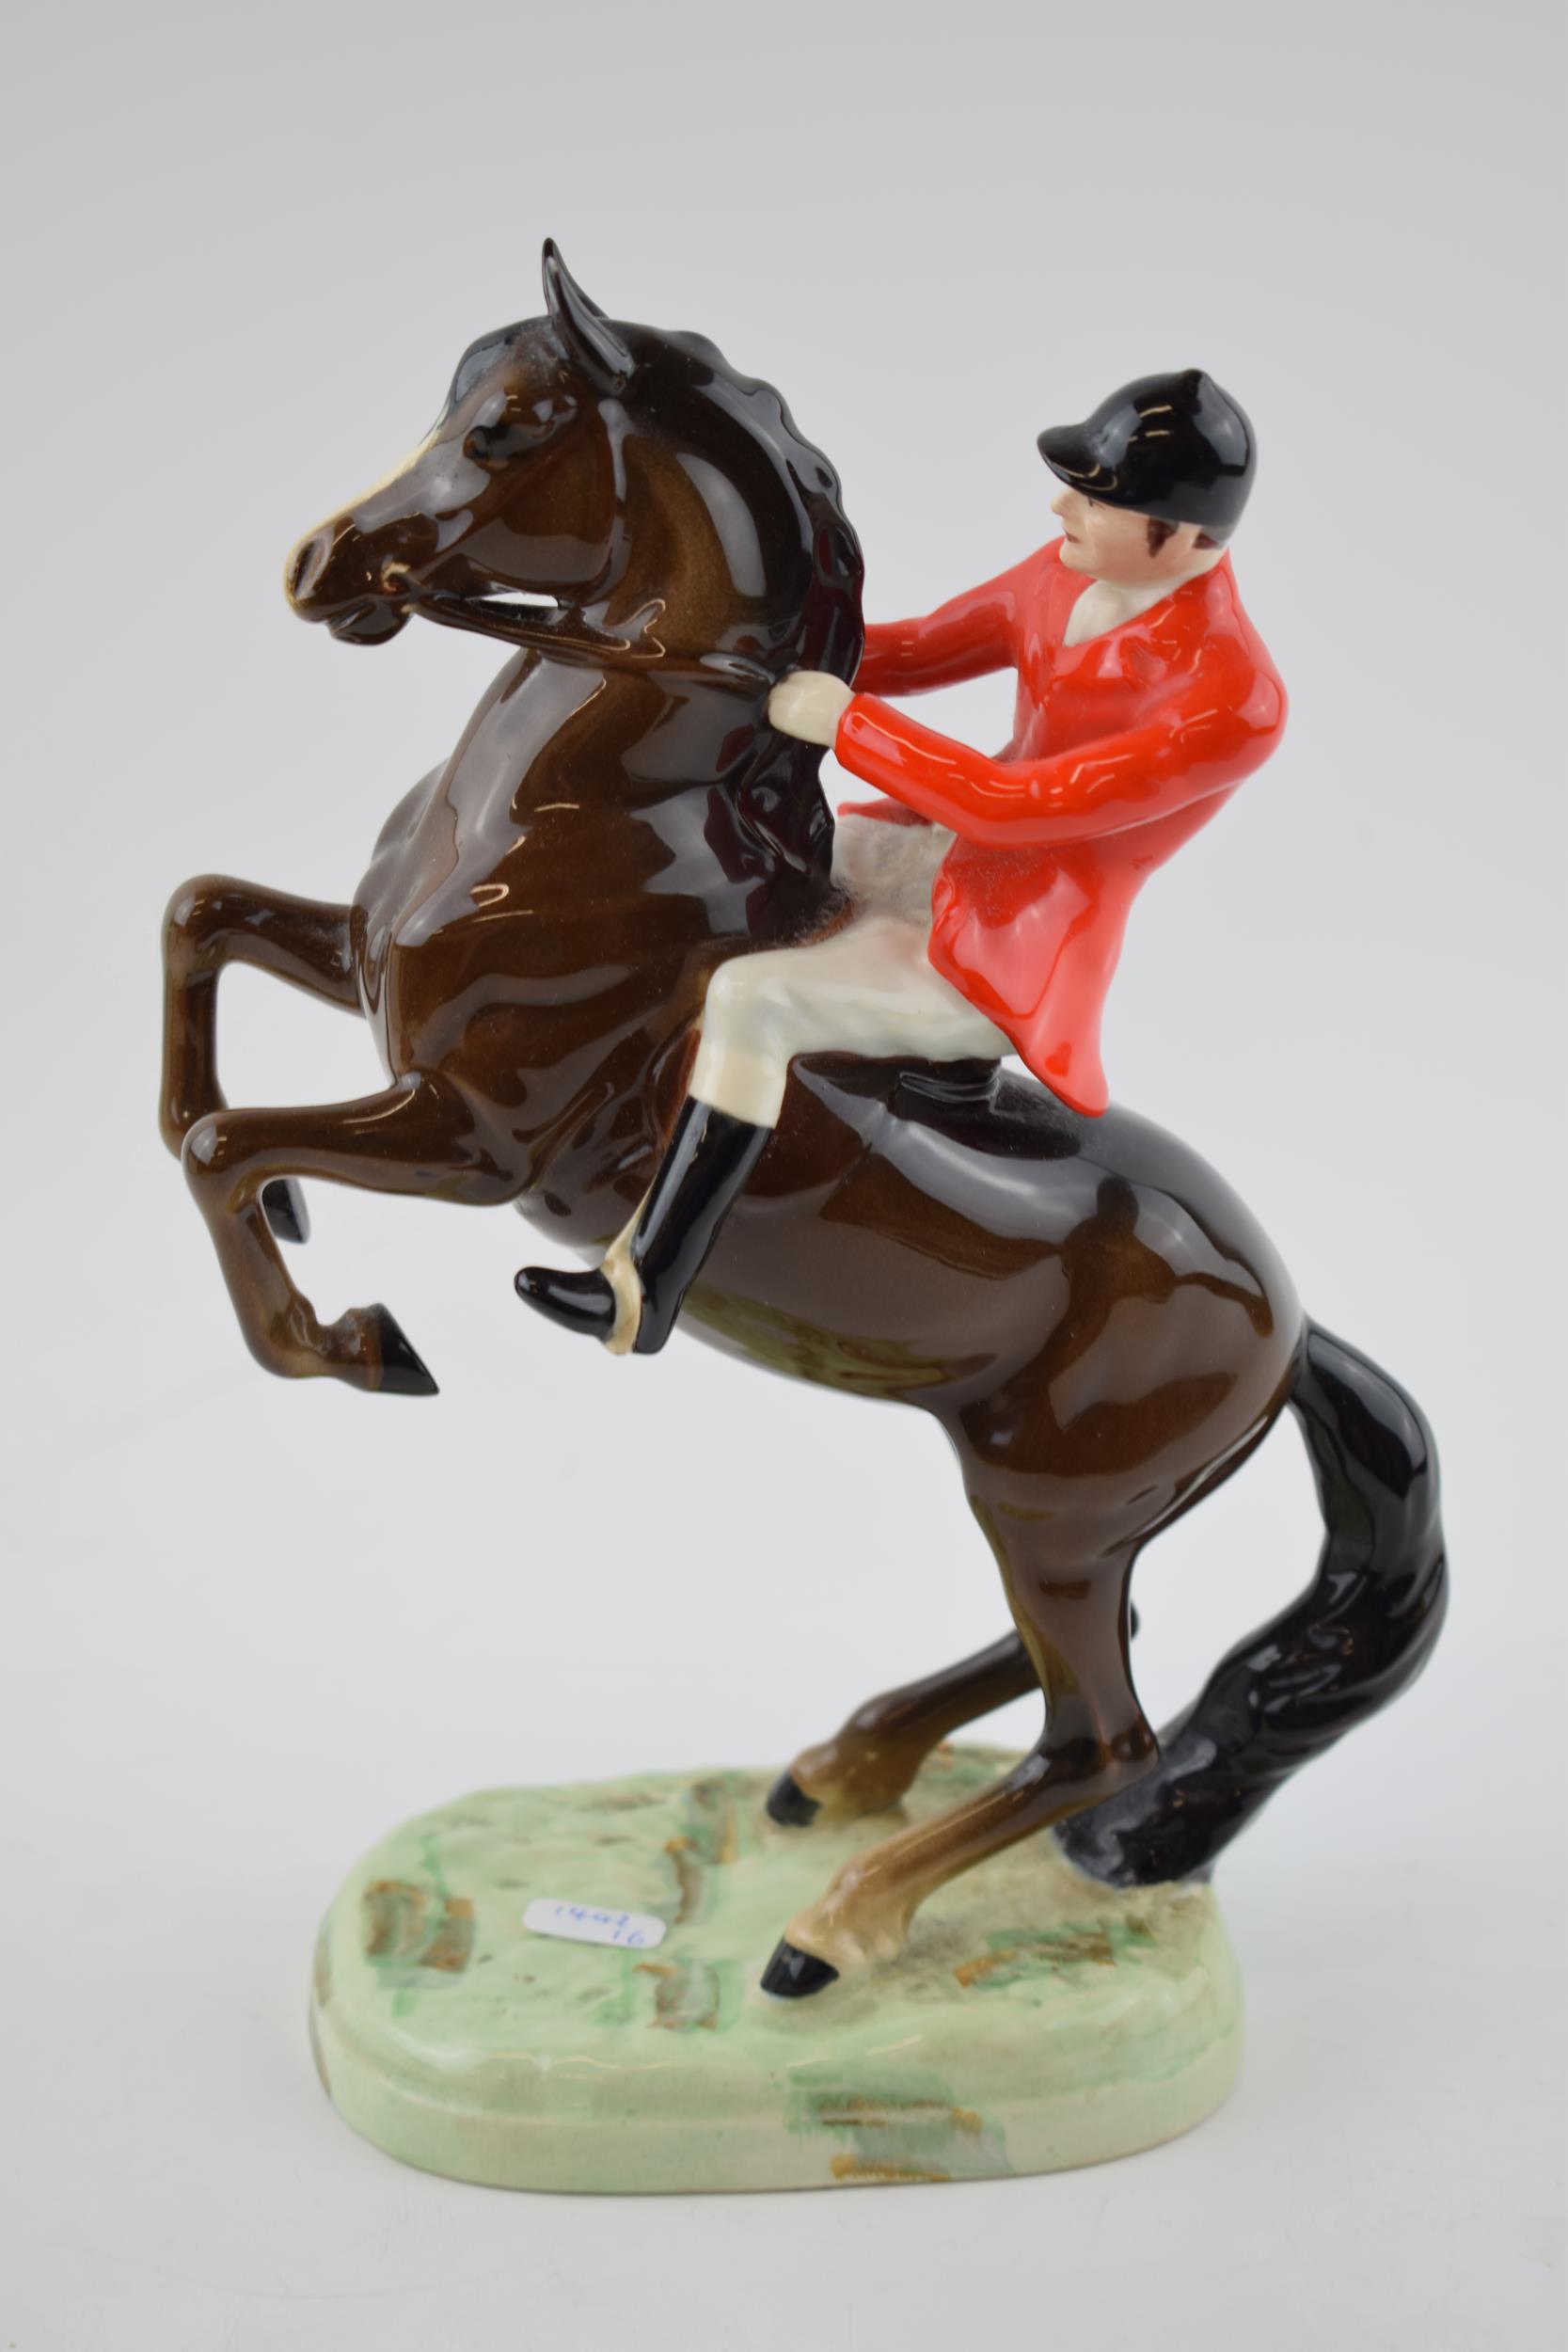 Beswick rearing huntsman on brown horse 868. In good condition with no obvious damage or - Image 2 of 3